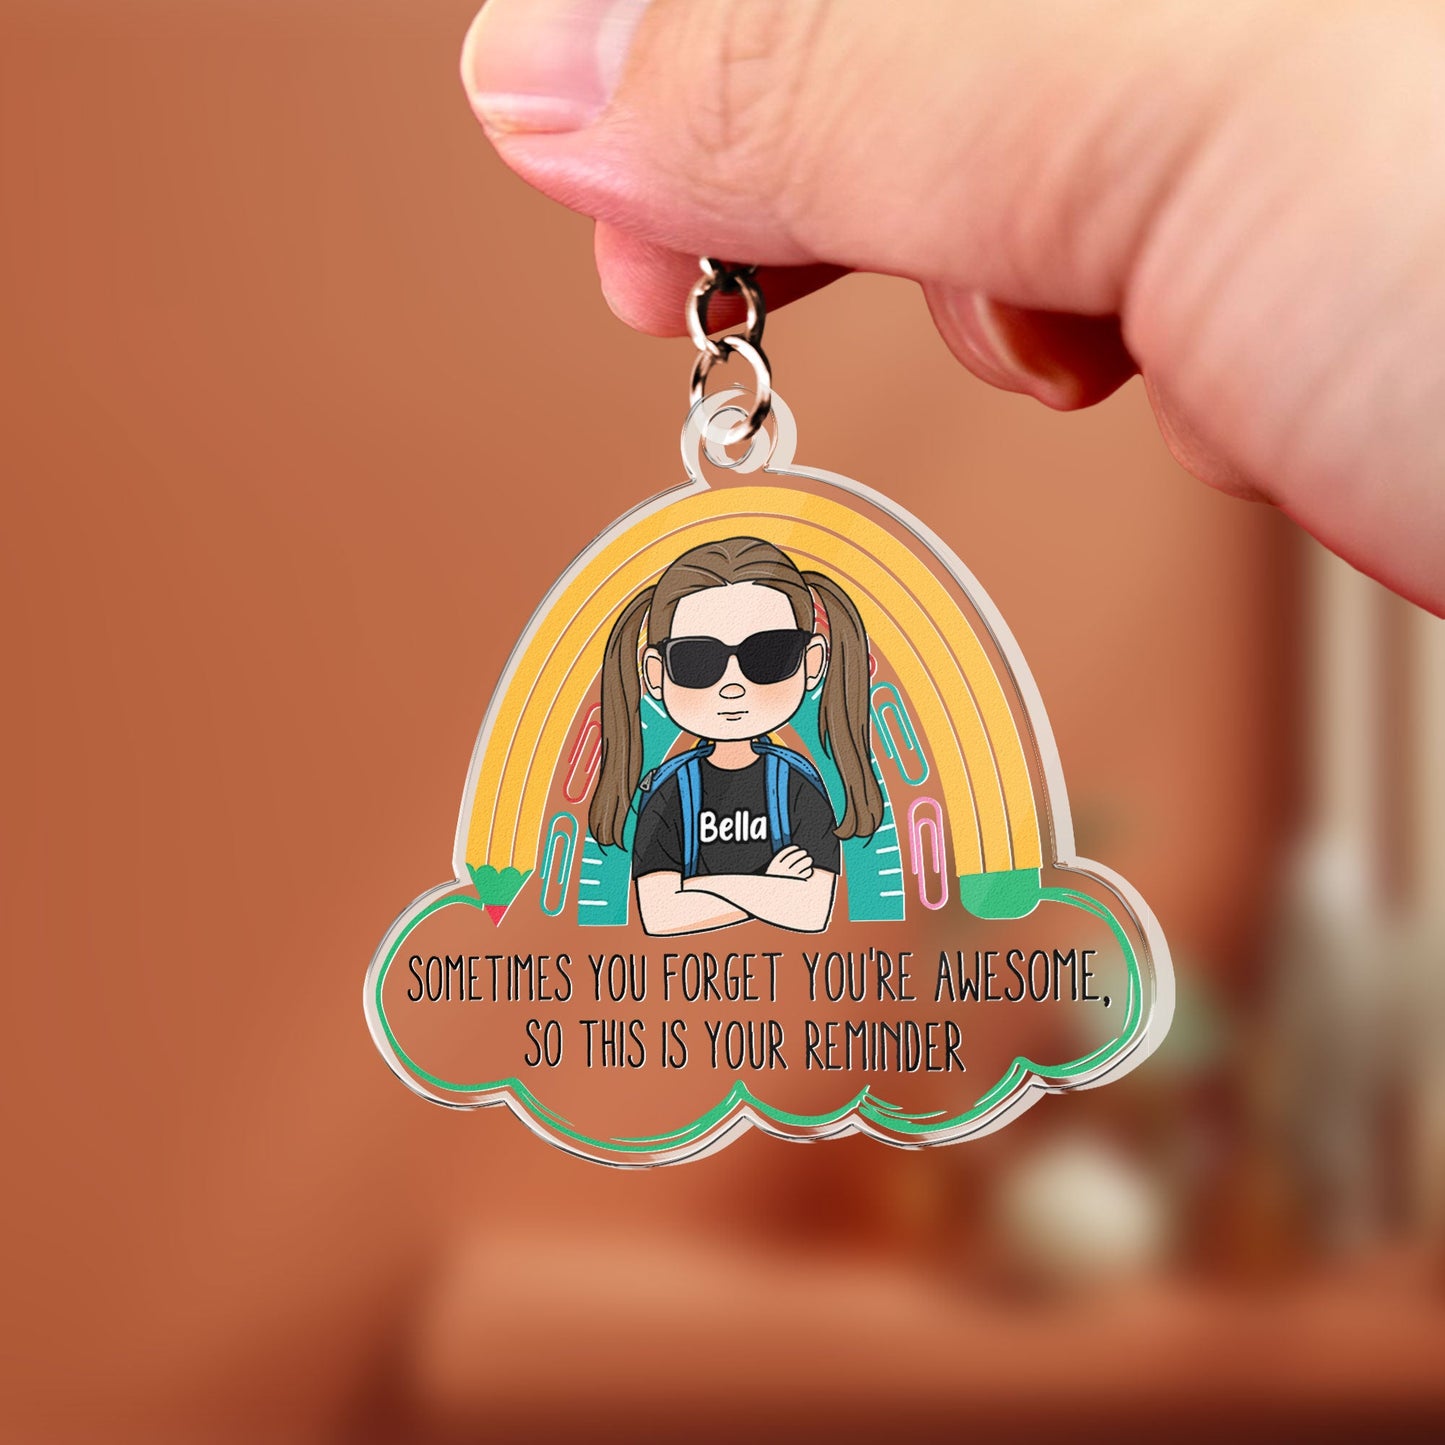 You're Awesome - Personalized Acrylic Keychain